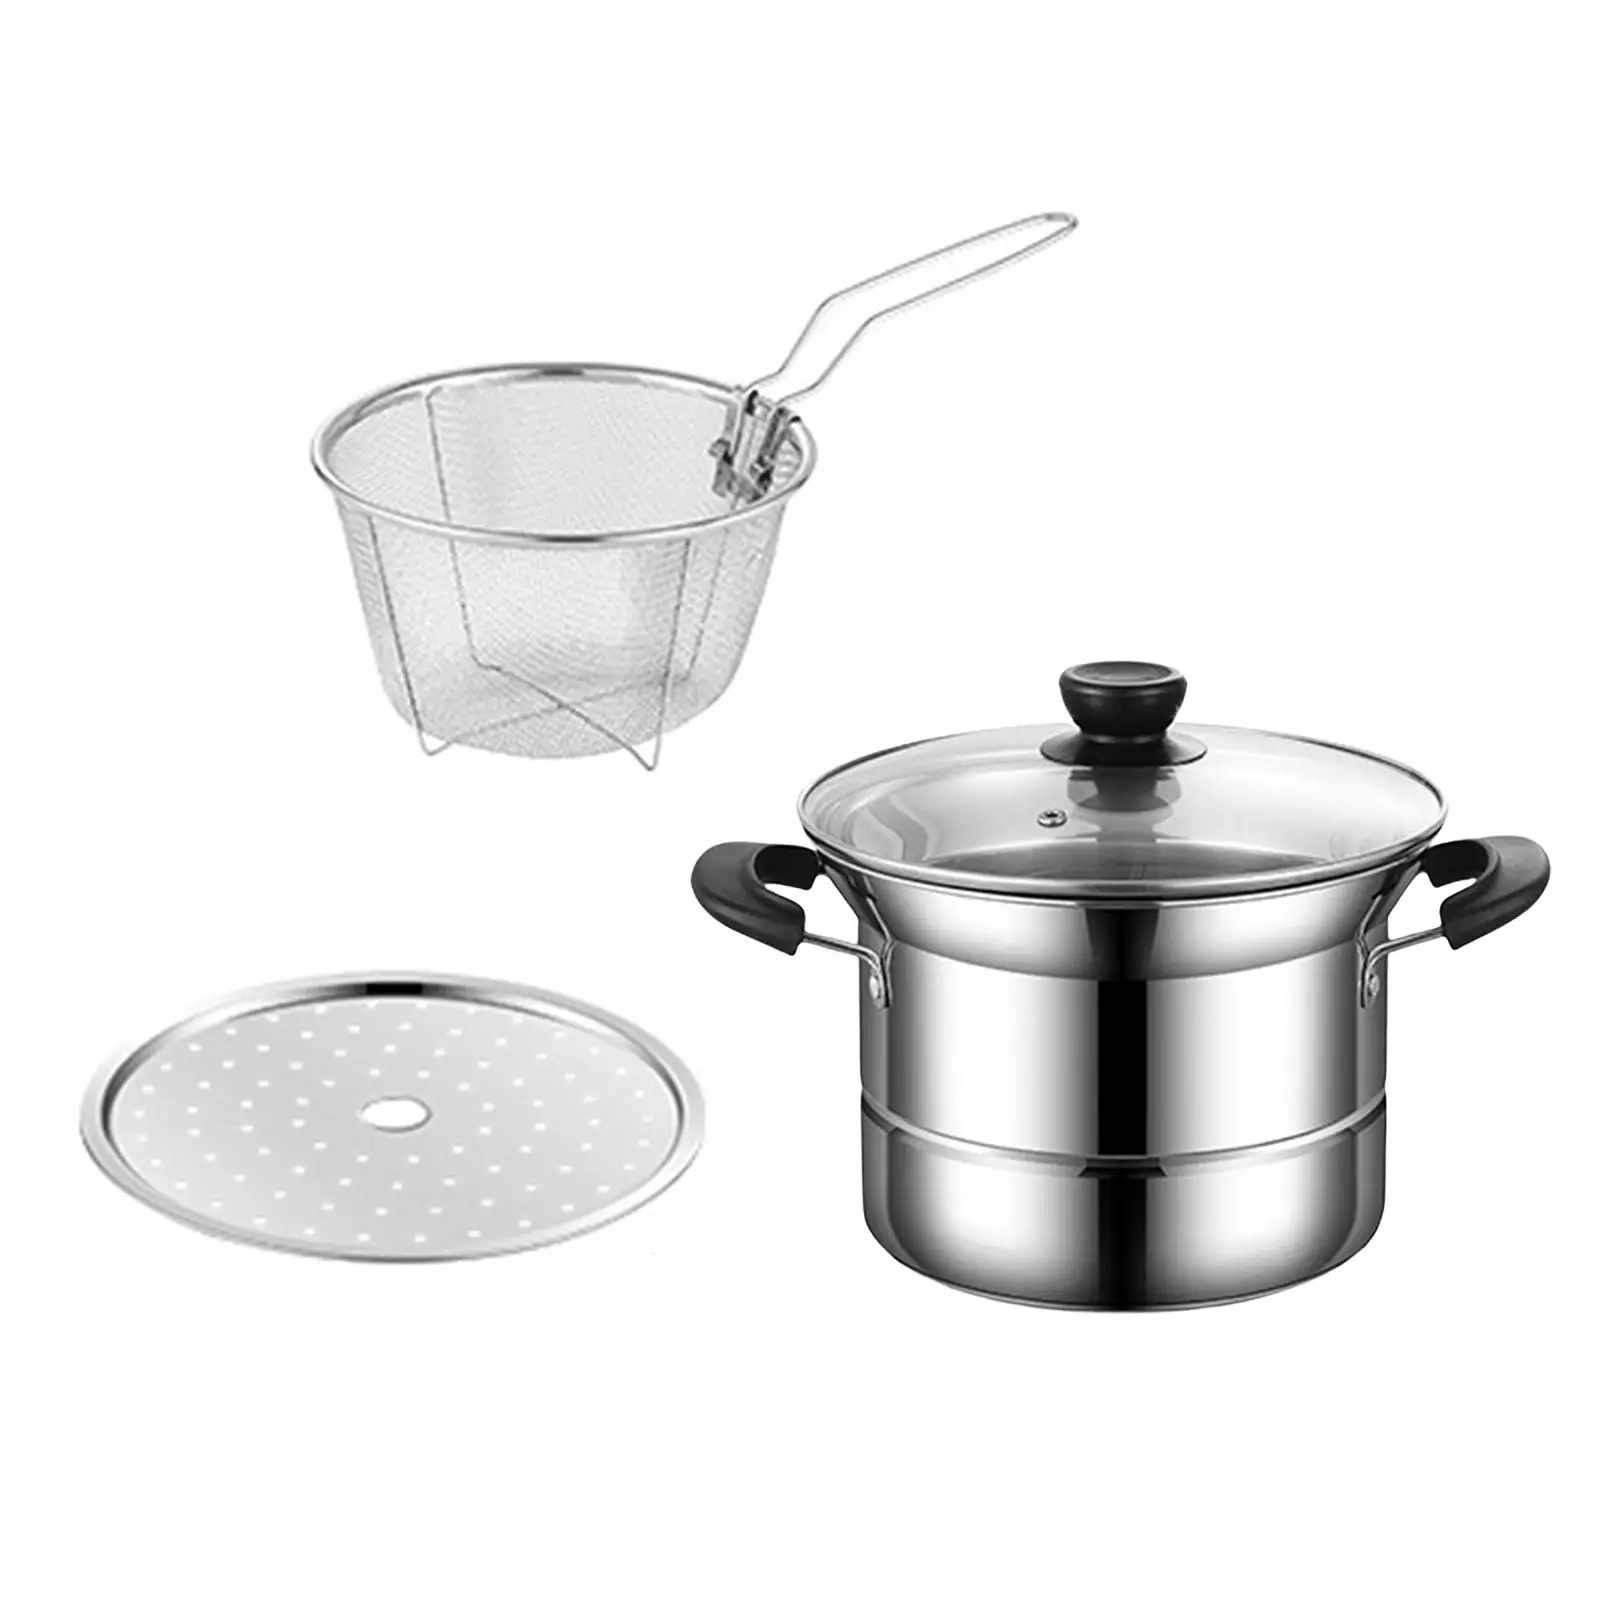 Stainless Steel Sauce Pan Milk Pot Cookware Sets Multipurpose with Lid Handle Cooker Cooking Pot for Pasta Picnic Restaurant